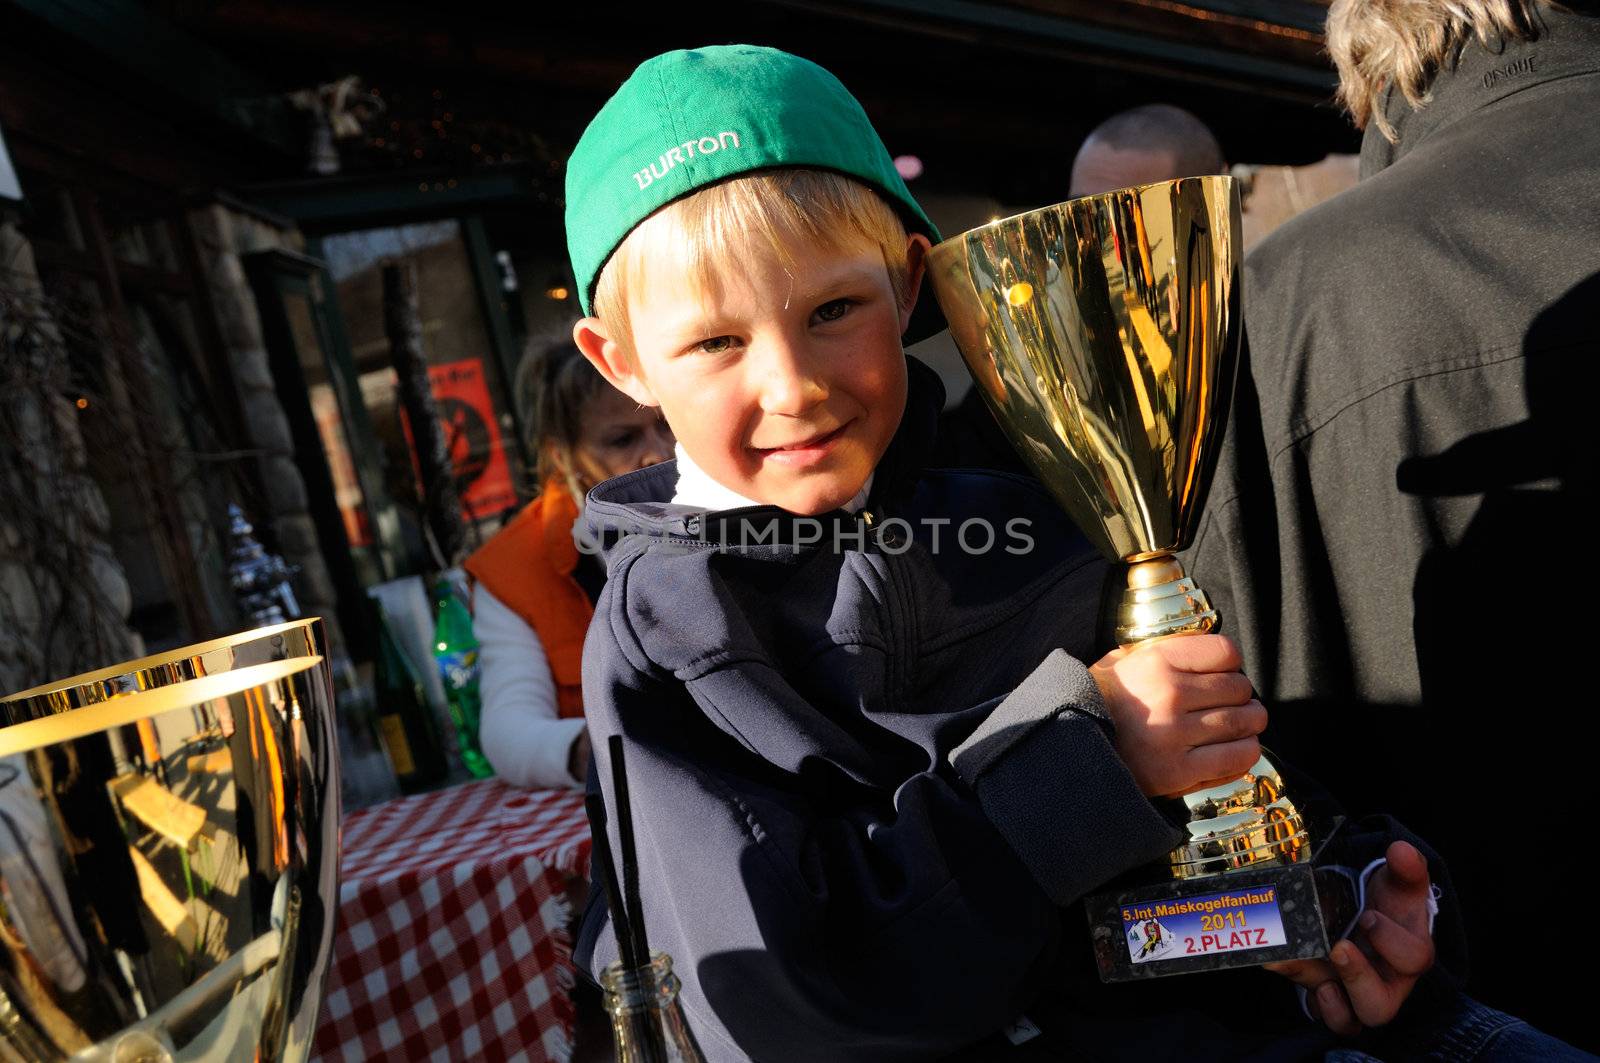 KAPRUN AUSTRIA - MARCH 5: Maiskogel Fanlauf 2011. Unidentified boy holding his trophy at charity ski race with many celebrities in austria on March 5, 2011 at the Maiskogel in Kaprun, Austria